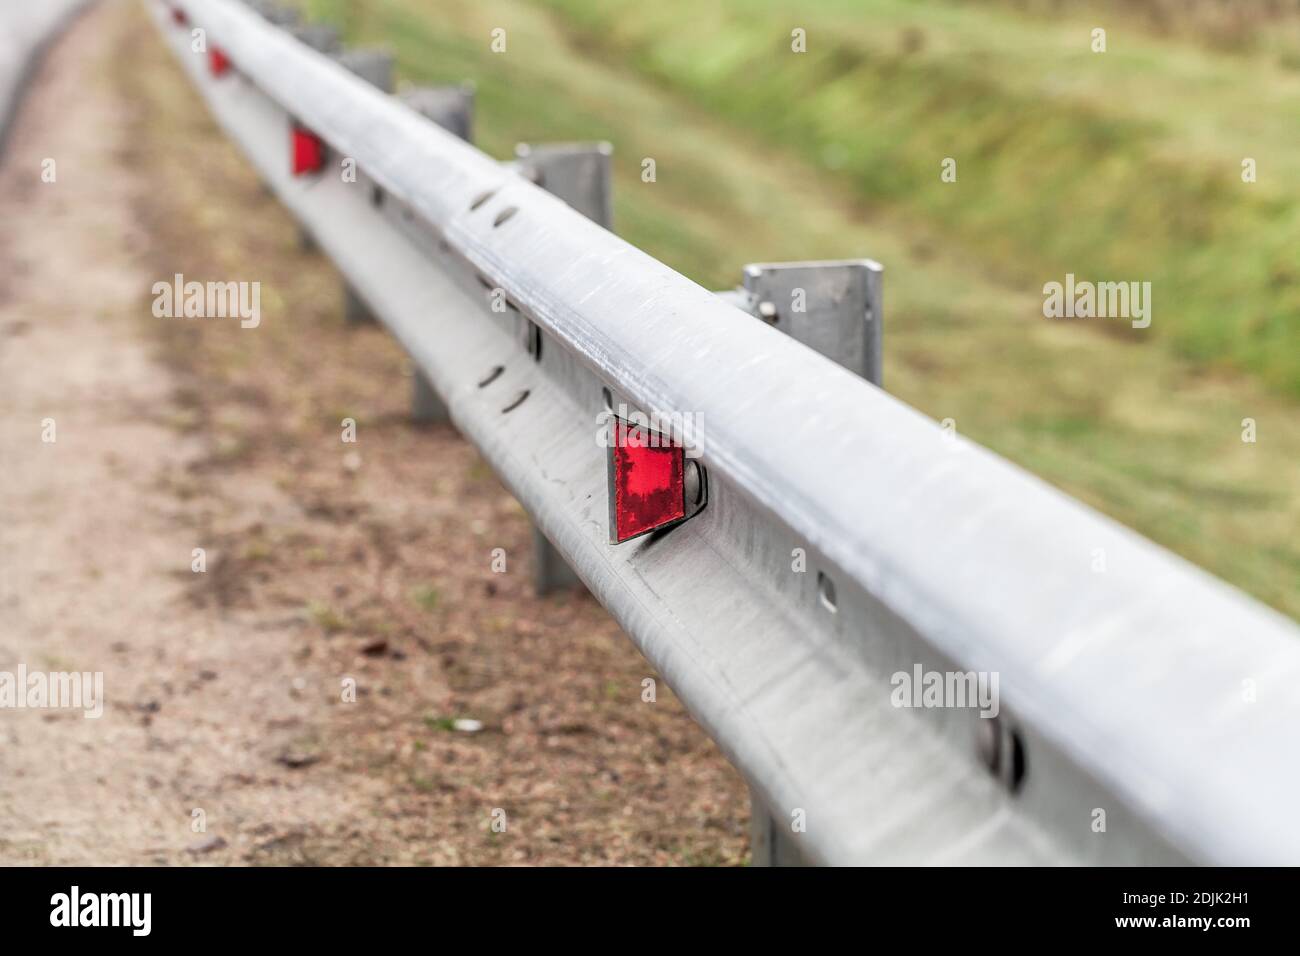 Metal guardrail mounted on a highway roadside, safety equipment Stock Photo